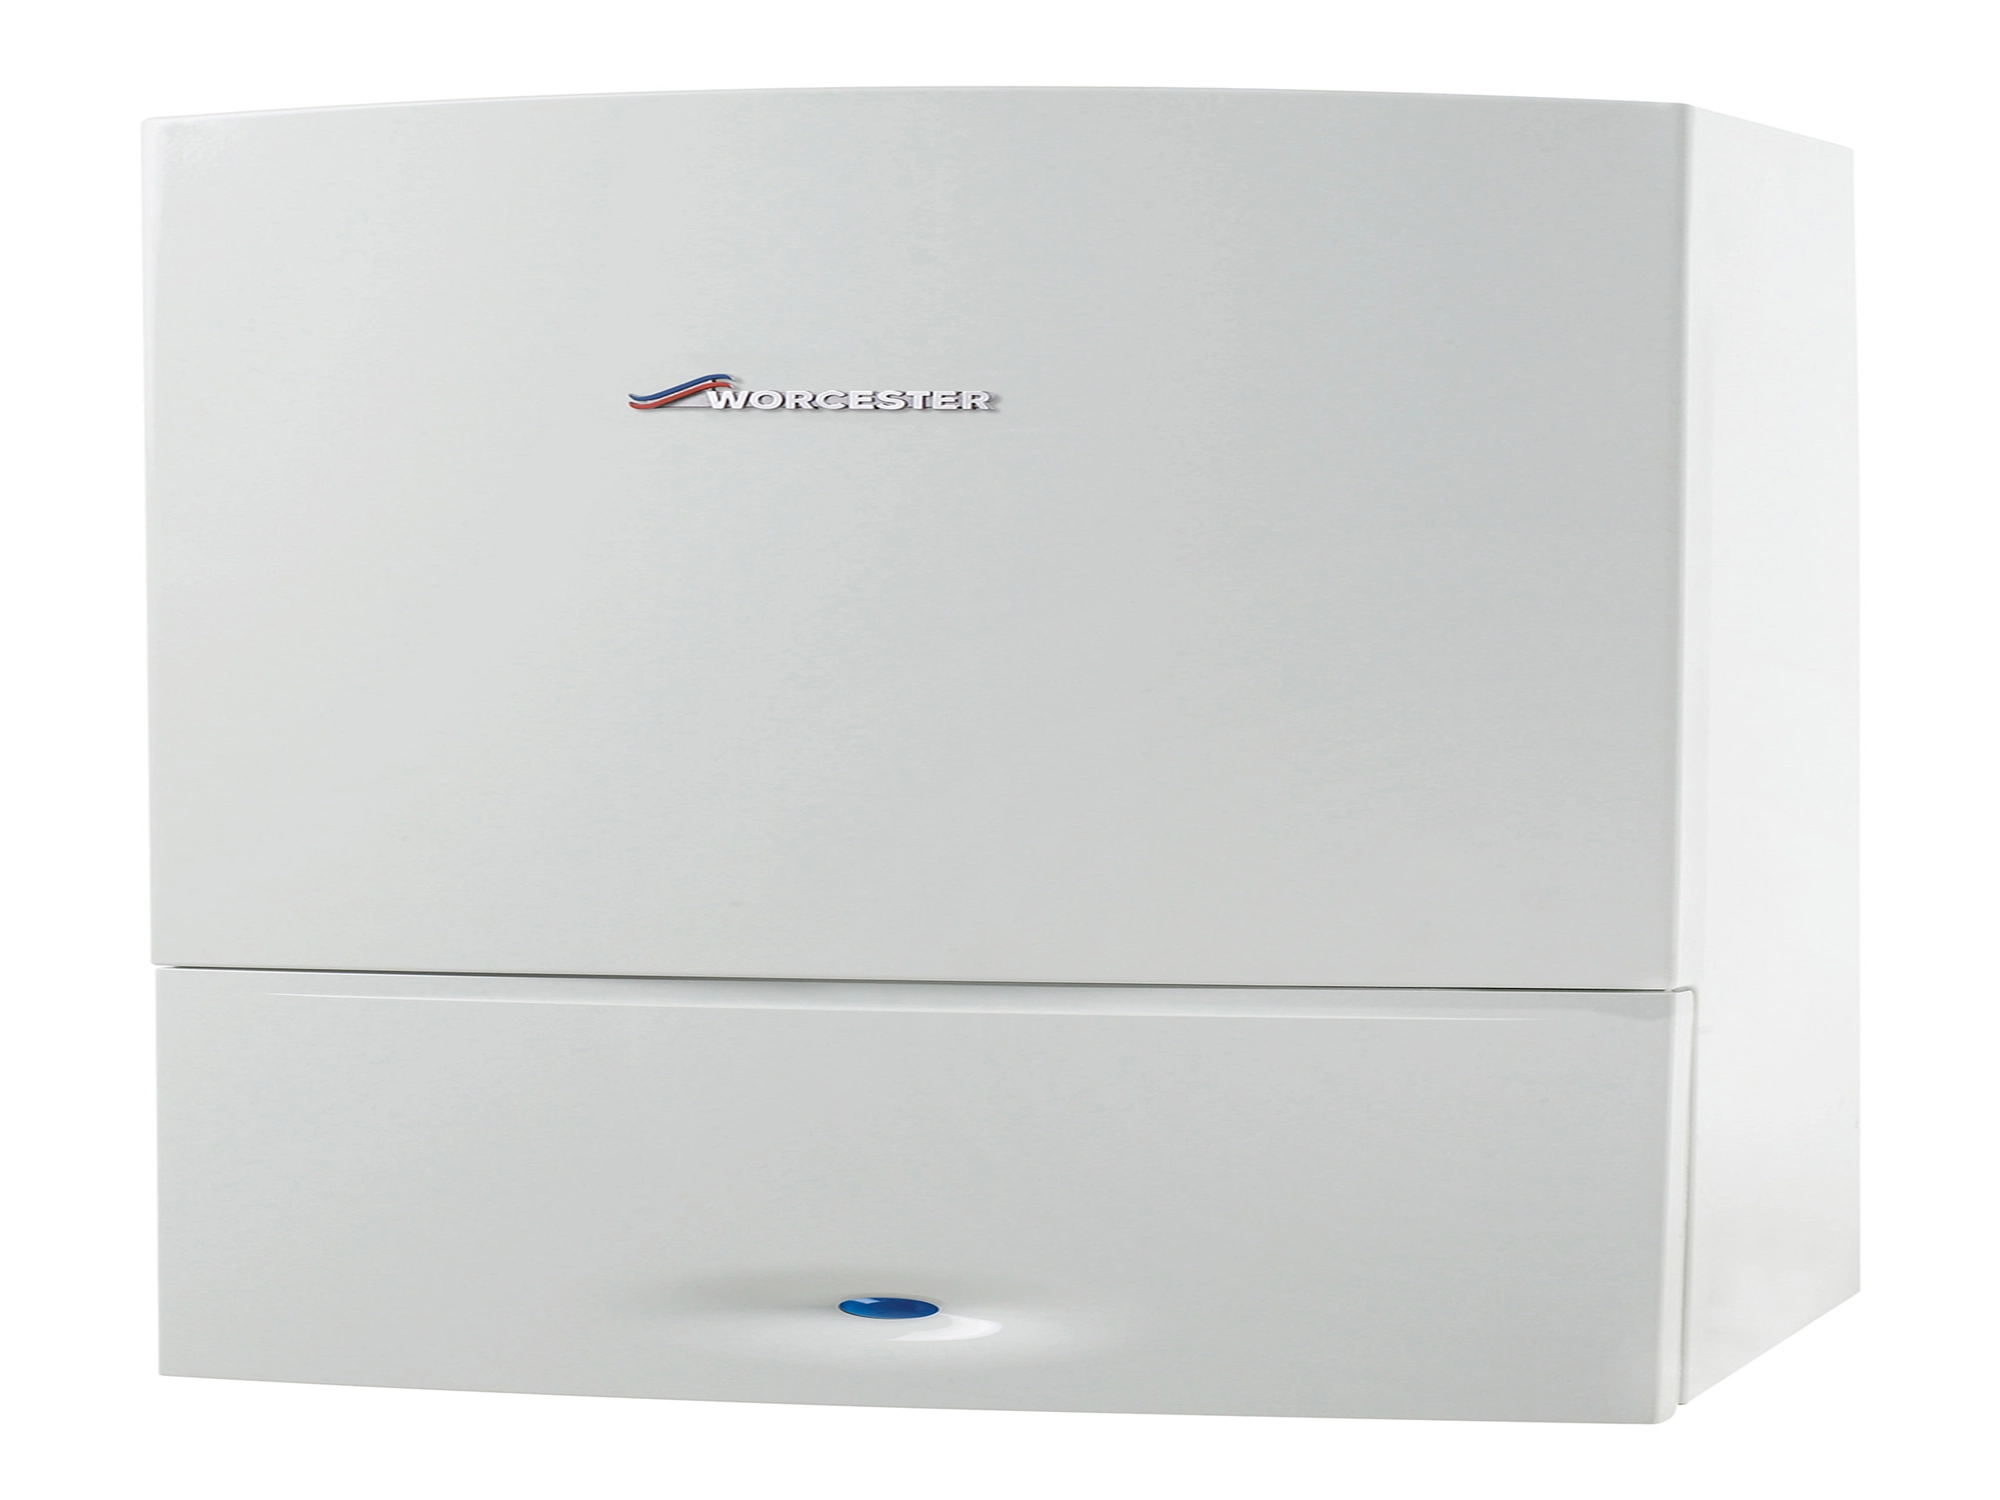 compare a worcester boiler with the other brands